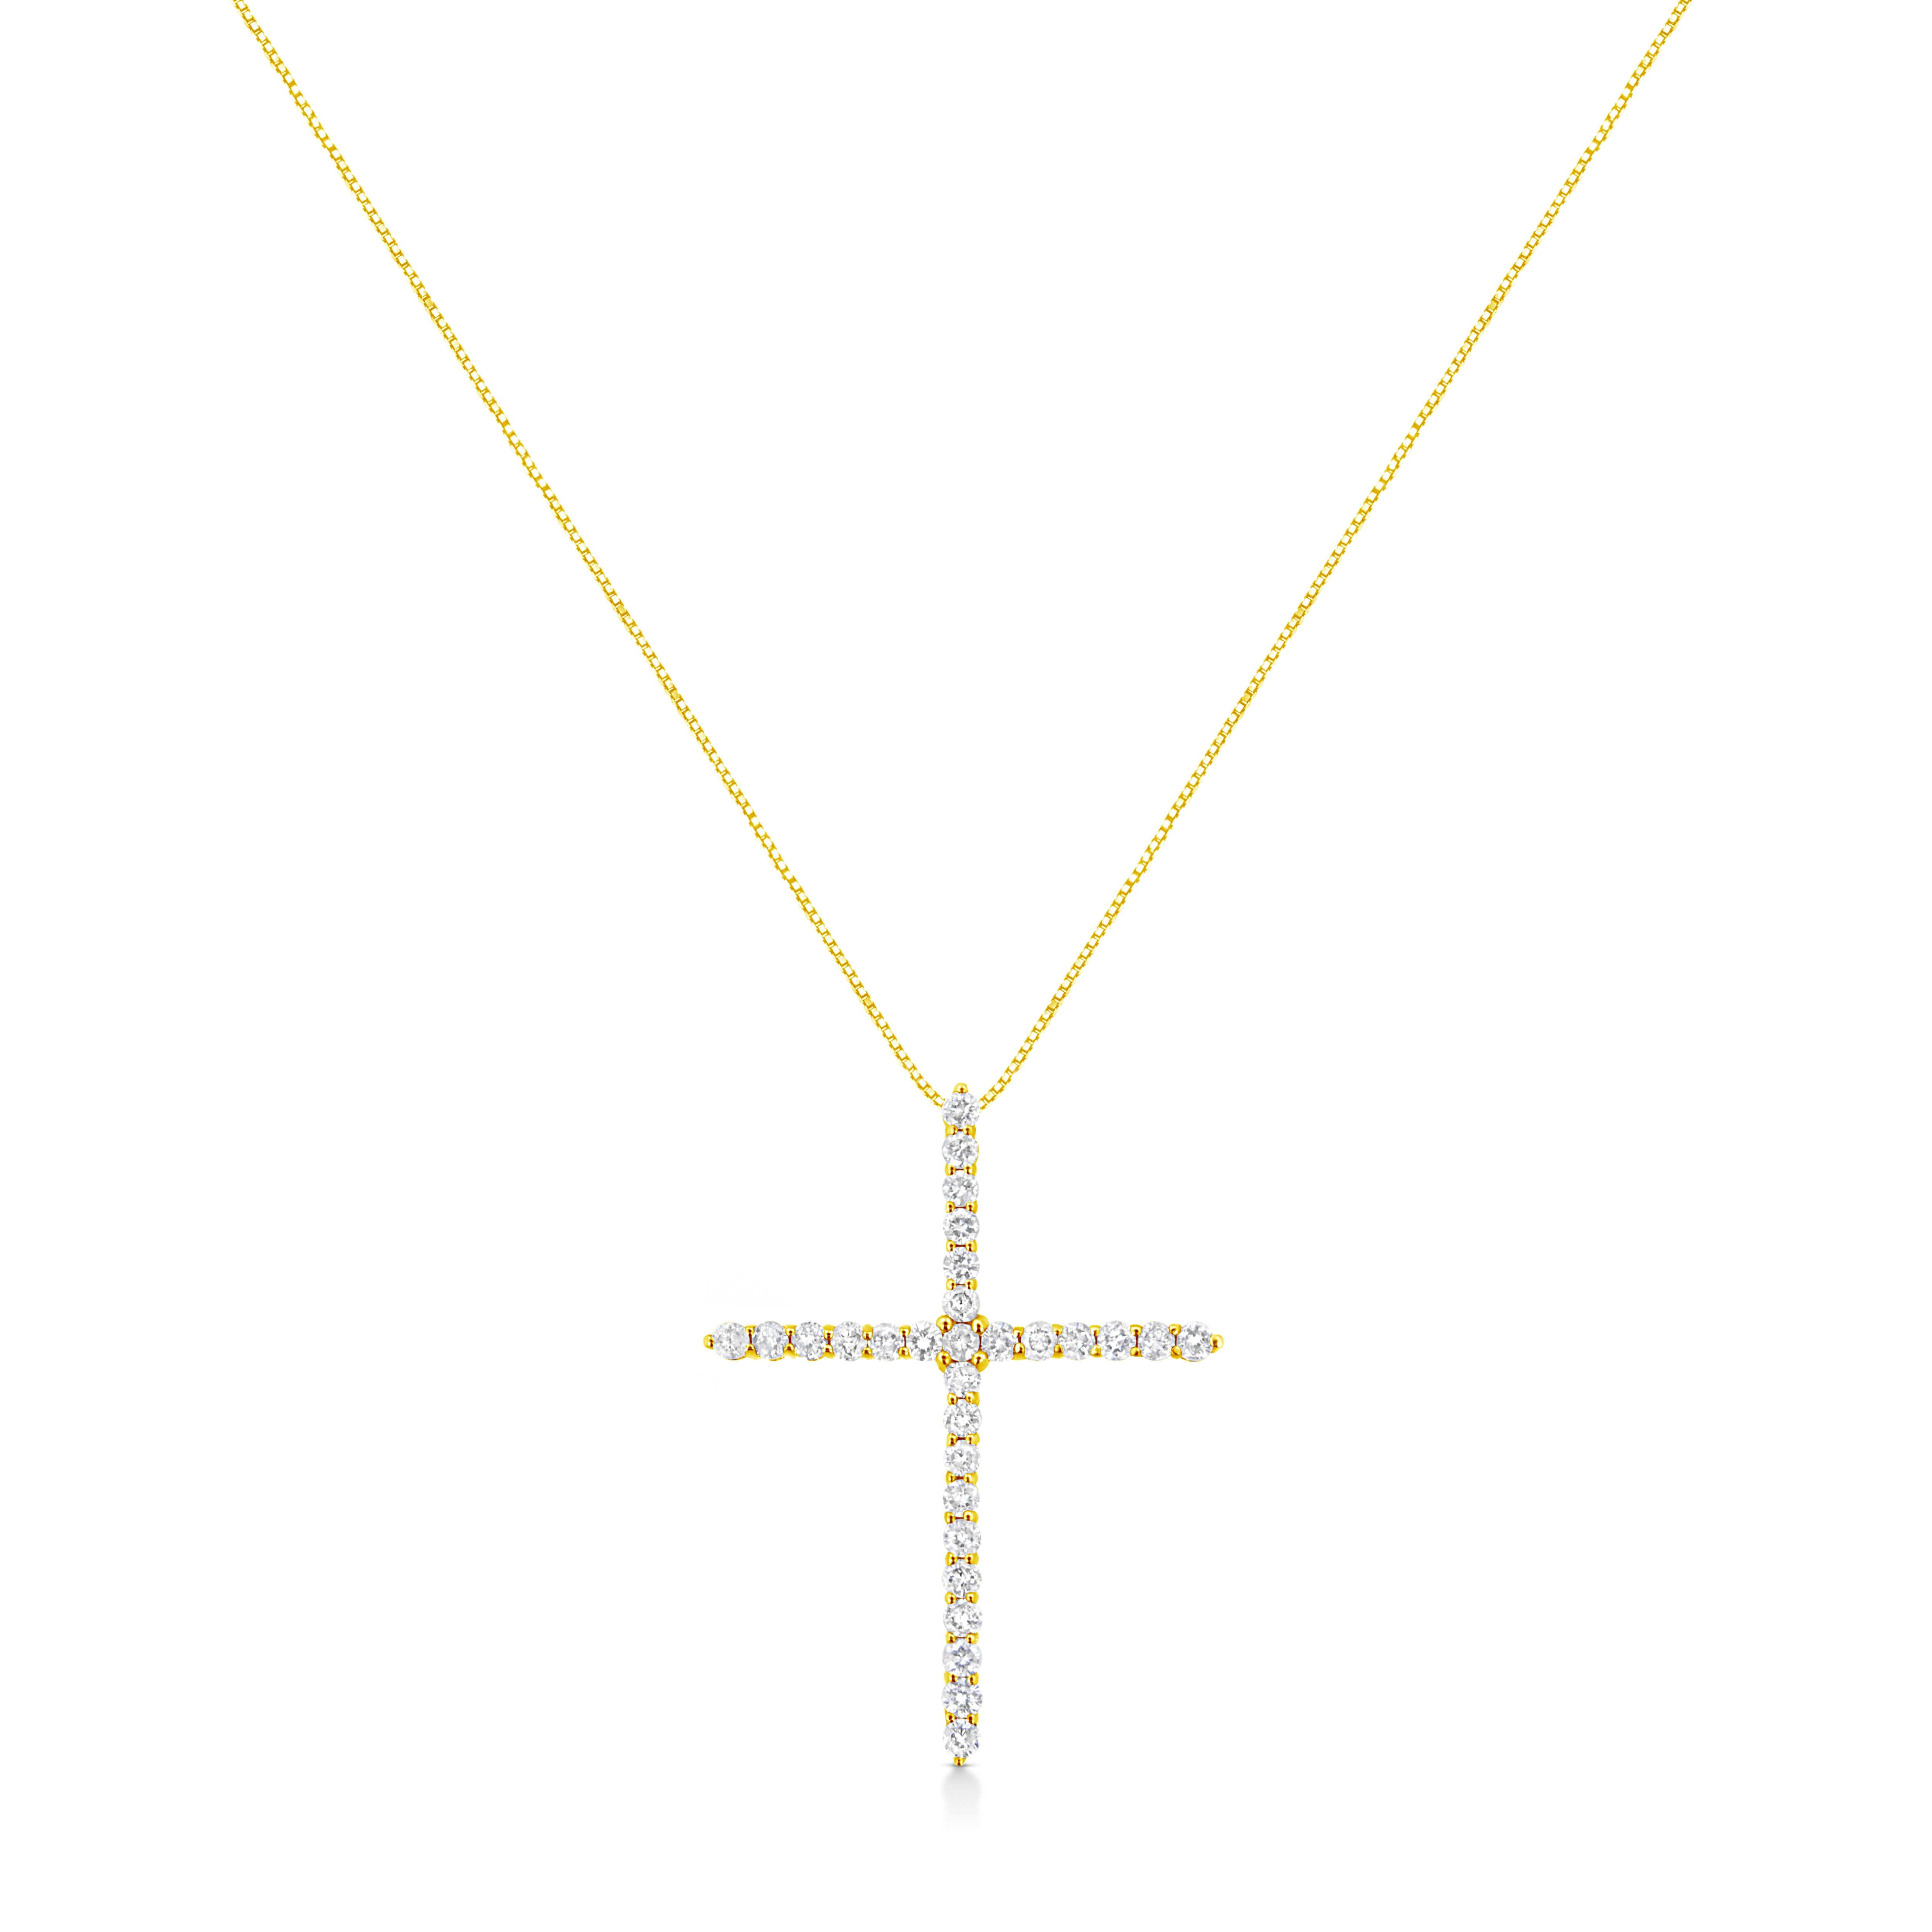 Share your faith with this stunning diamond cross pendant necklace. This cherished cross necklace for her, features 29 natural, round-cut diamonds set in 10k Yellow Gold Plated Sterling Silver. The pendant is suspended from an 18-inch box chain with